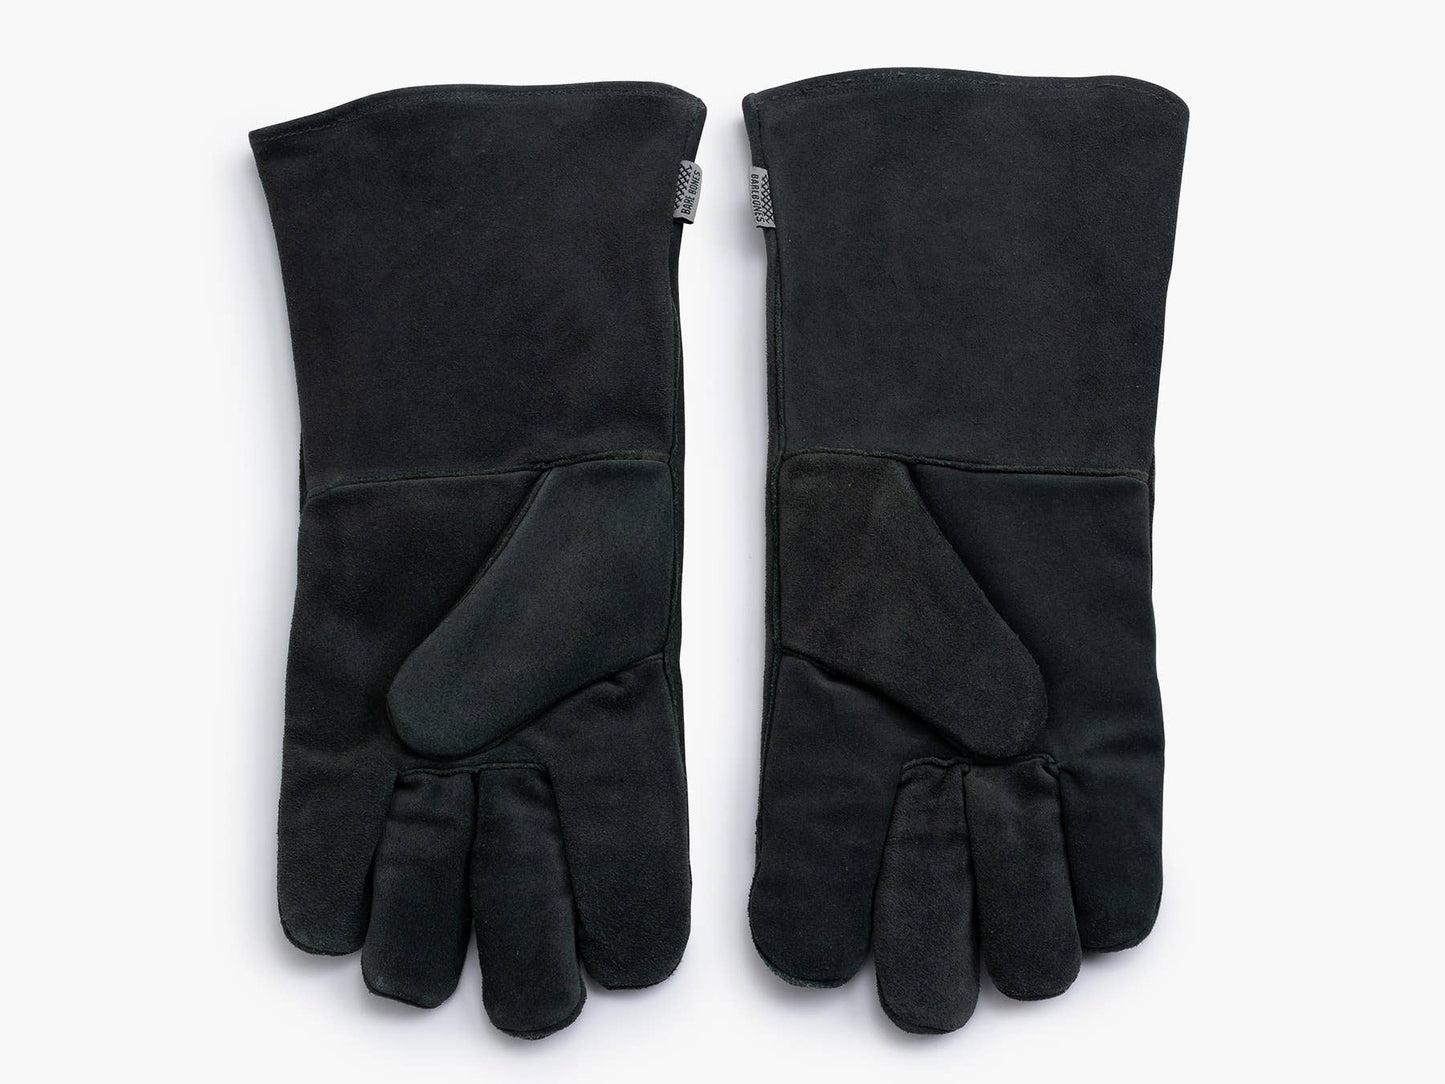 Open Fire Glove - Large